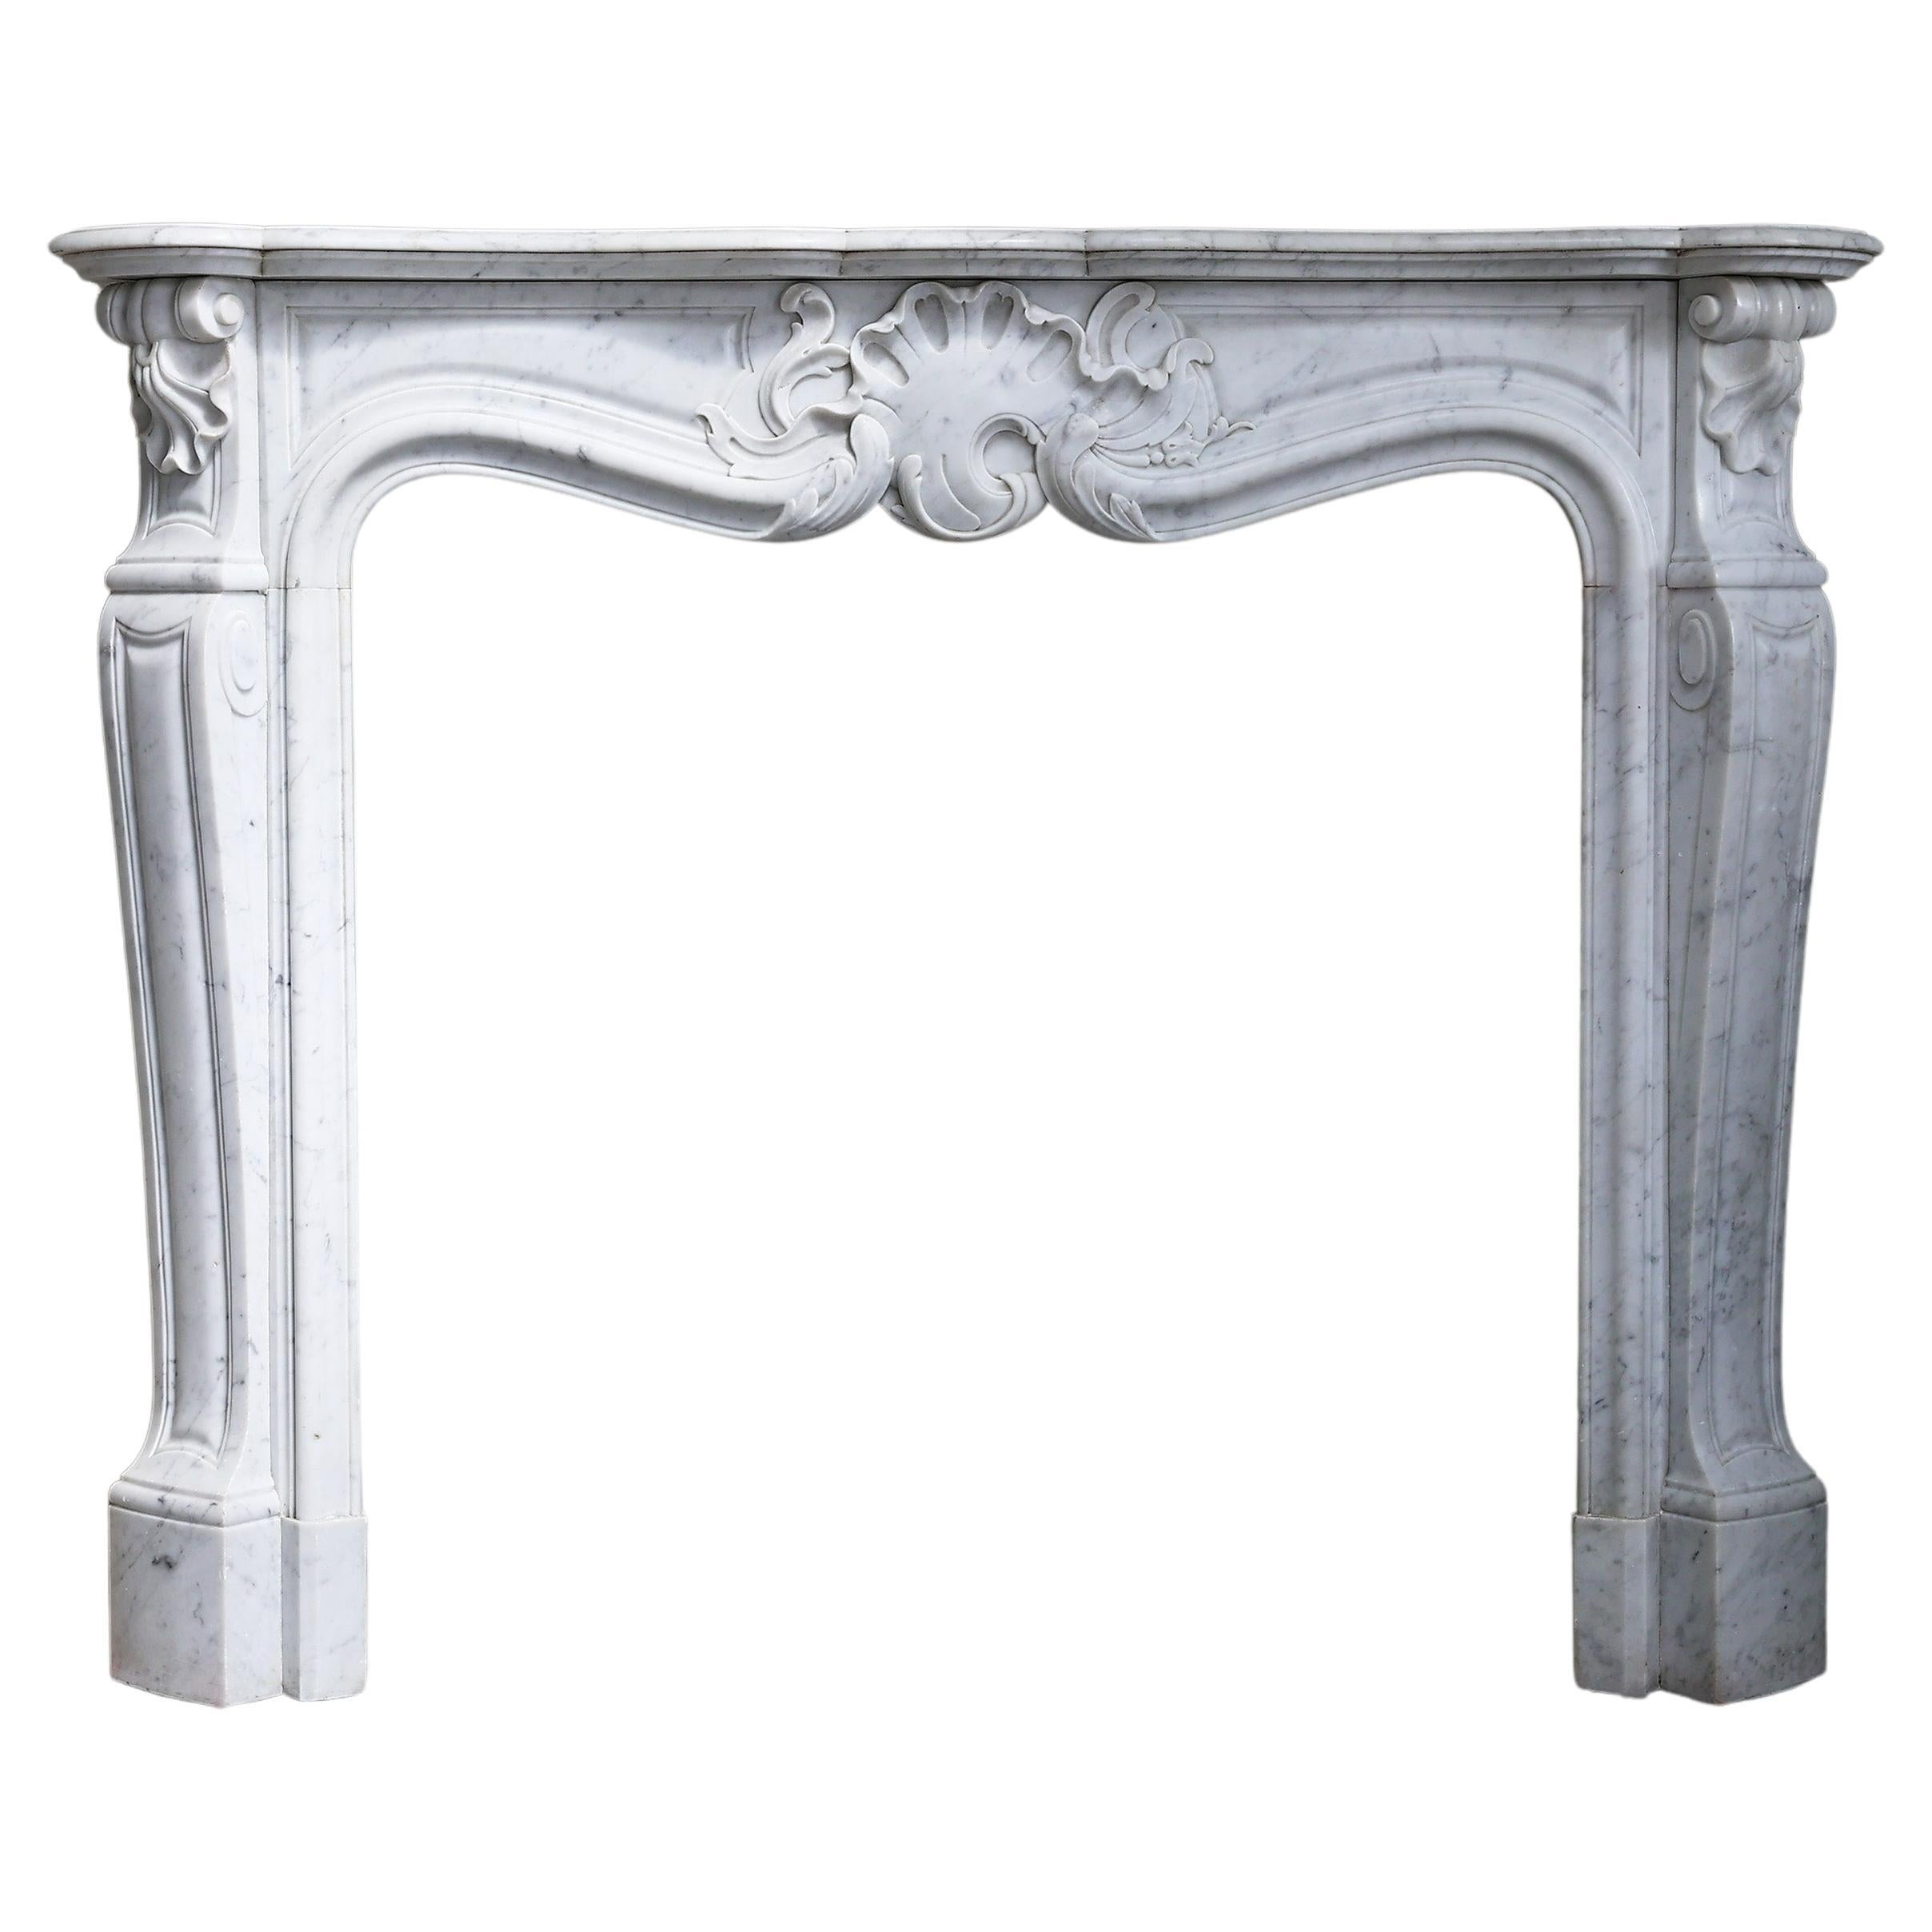 19th Century Fireplace in Style of Louis XV of Carrara Marble